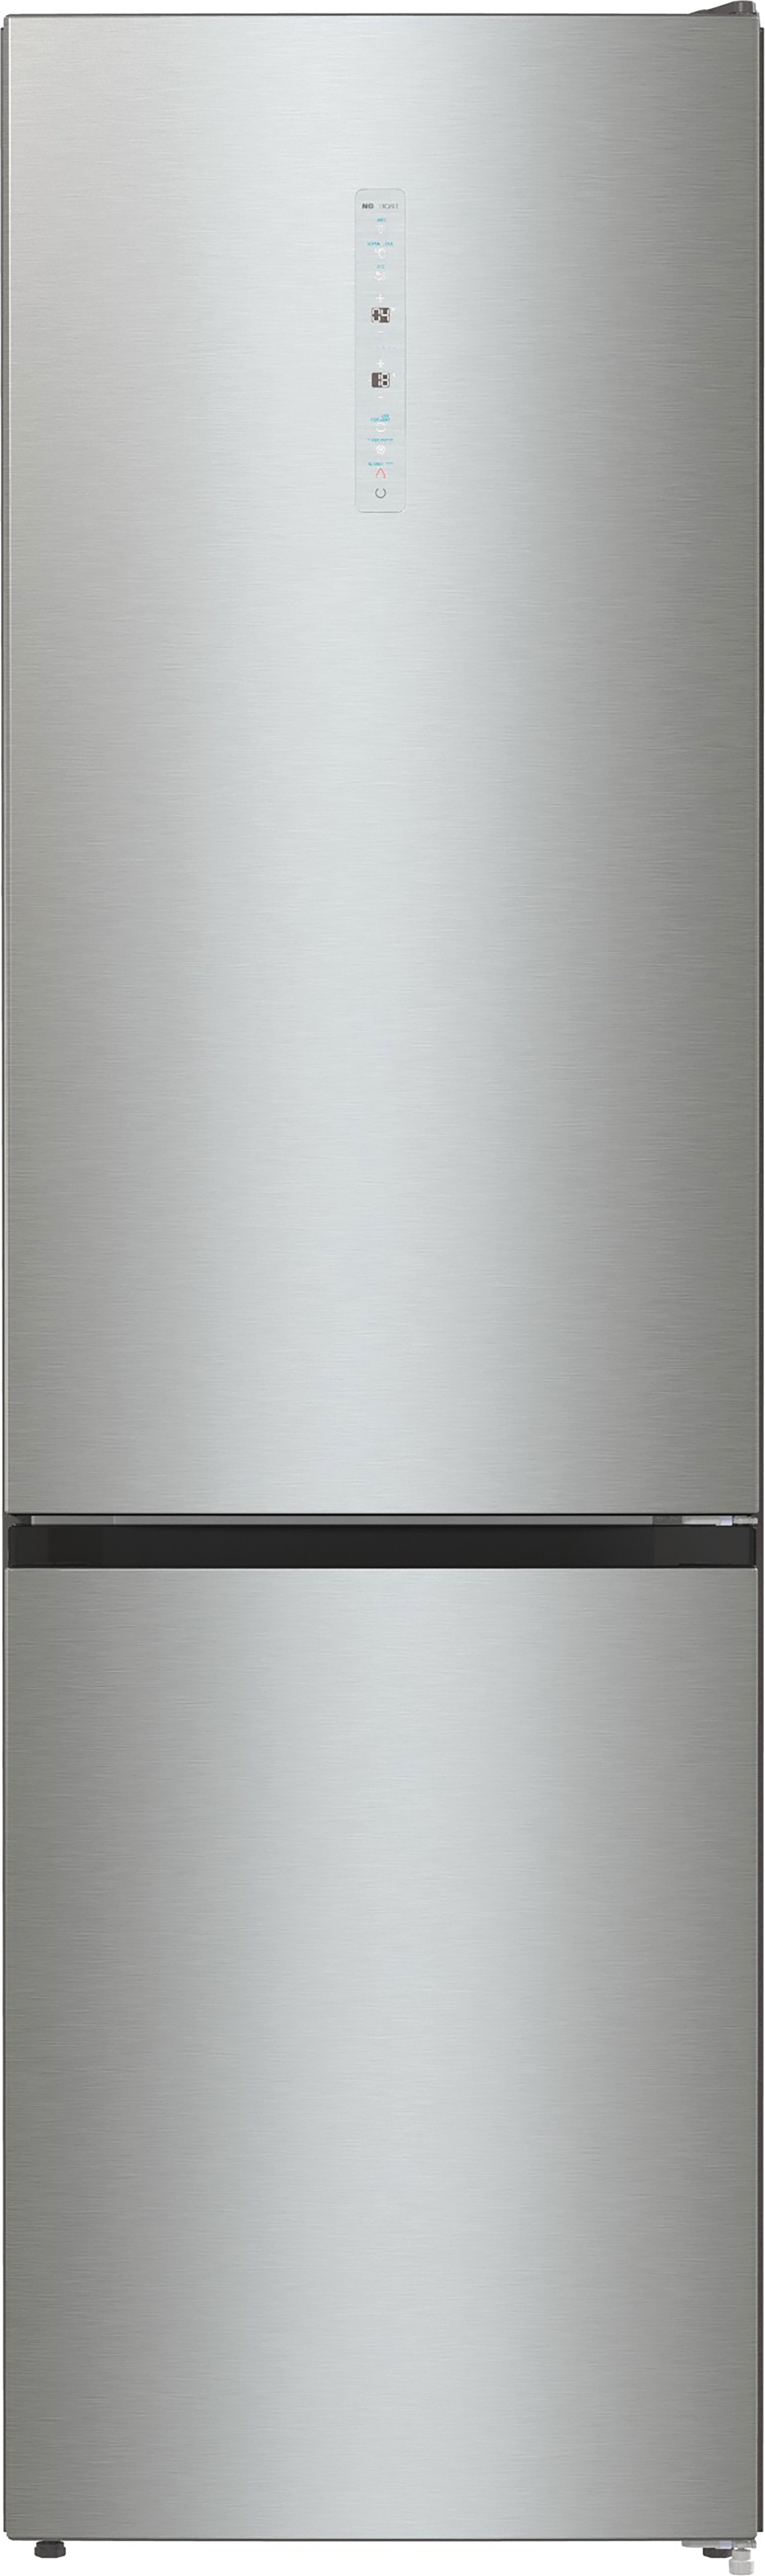 Hisense RB470N4SICUK Wifi Connected 60/40 Frost Free Fridge Freezer - Stainless Steel - C Rated, Stainless Steel